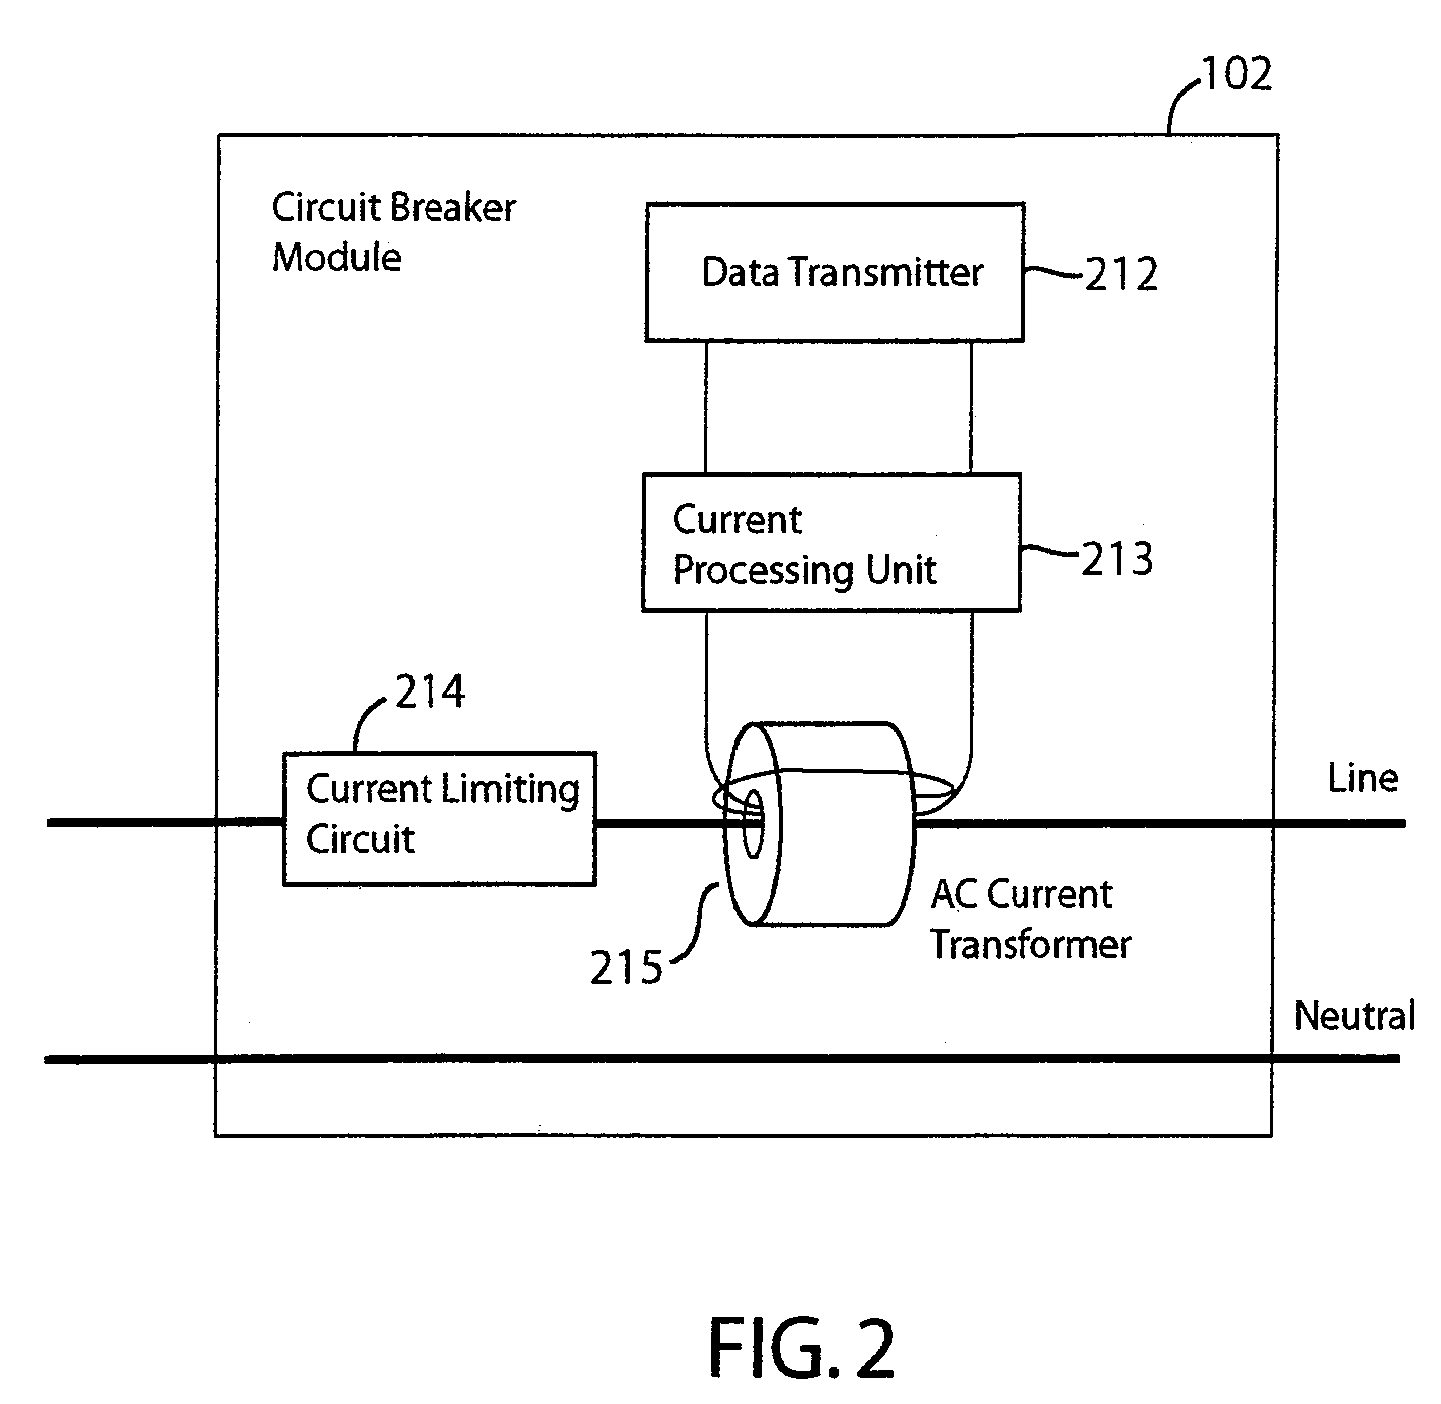 Method and apparatus for monitoring energy consumption of a customer structure